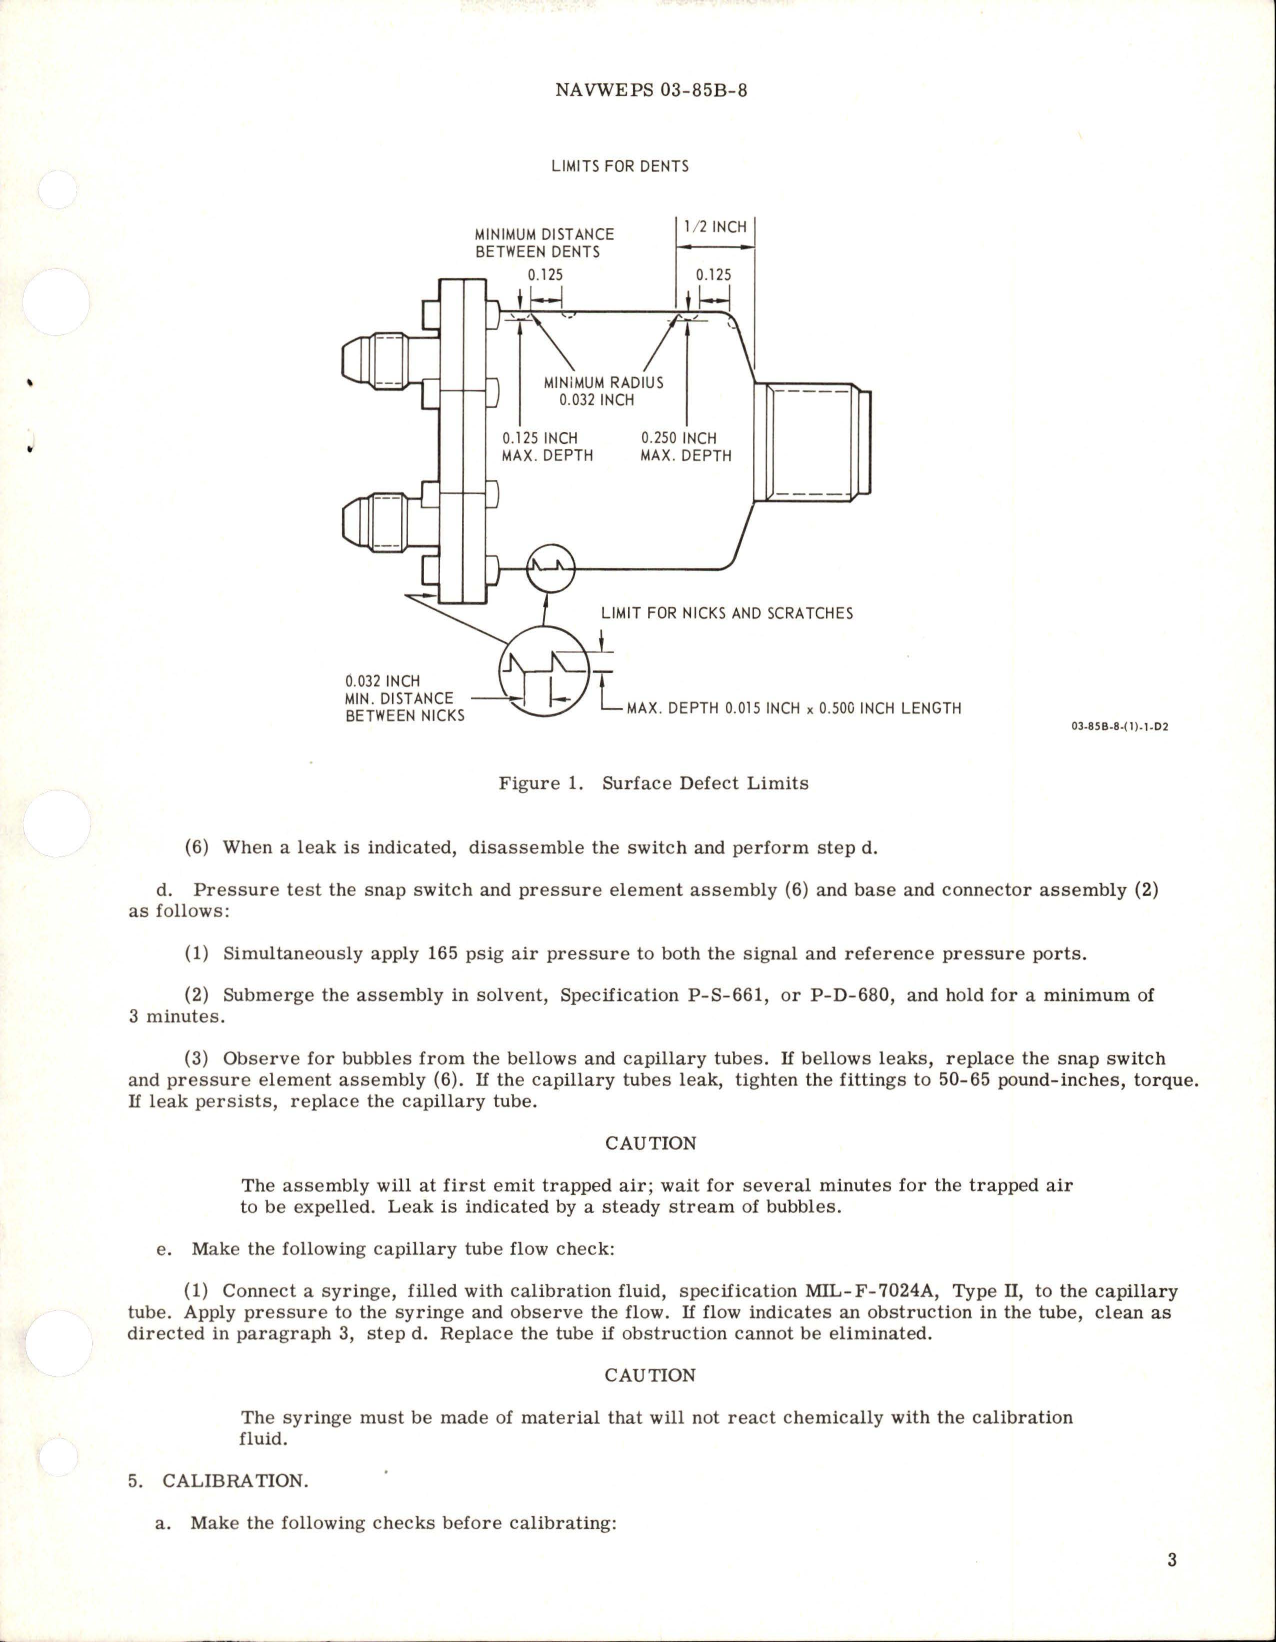 Sample page 5 from AirCorps Library document: Overhaul Instruction with Parts Breakdown for AB Ignition Pressure Switch - Model CG12291 and 3K1038 - Part 874C224P2 